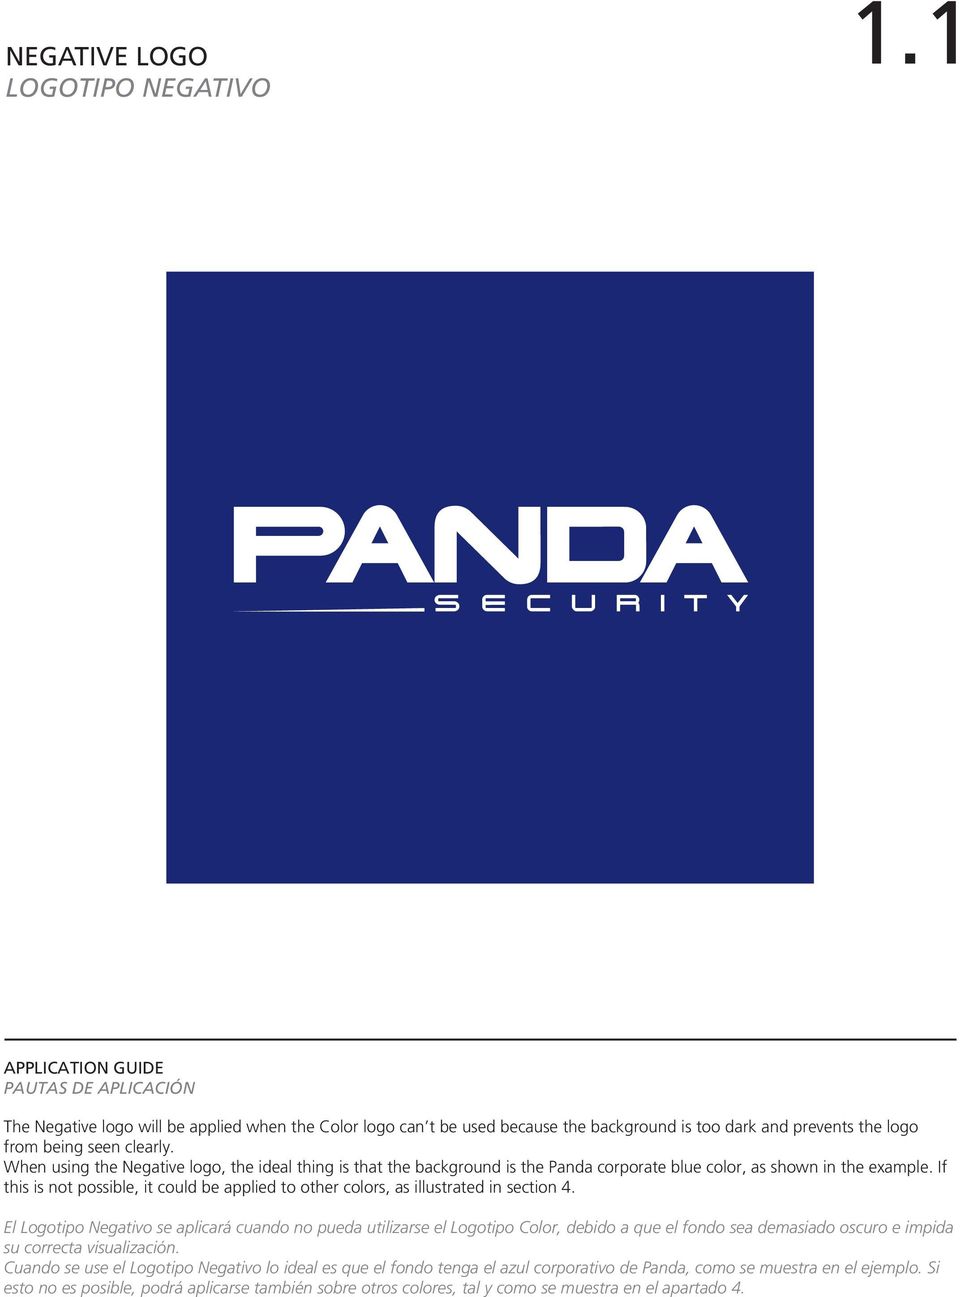 When using the Negative logo, the ideal thing is that the background is the Panda corporate blue color, as shown in the example.